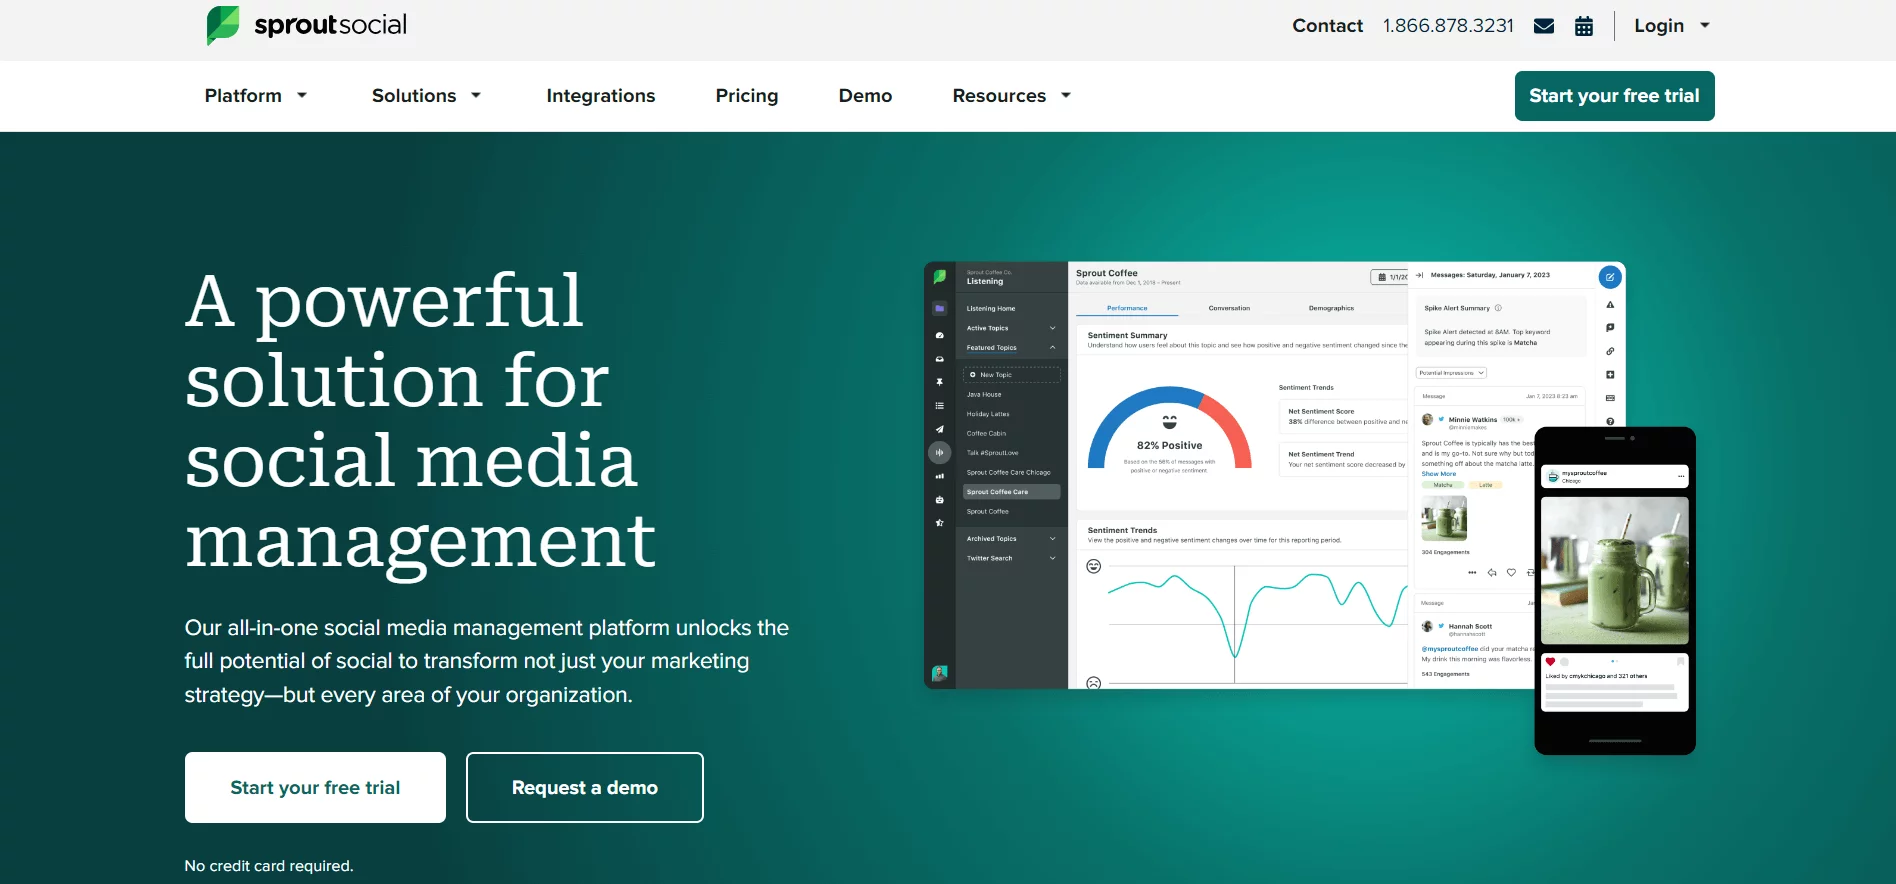 Sprout Social homescreen showing a screenshot with reports such as sentiment summary and sentiment trends.